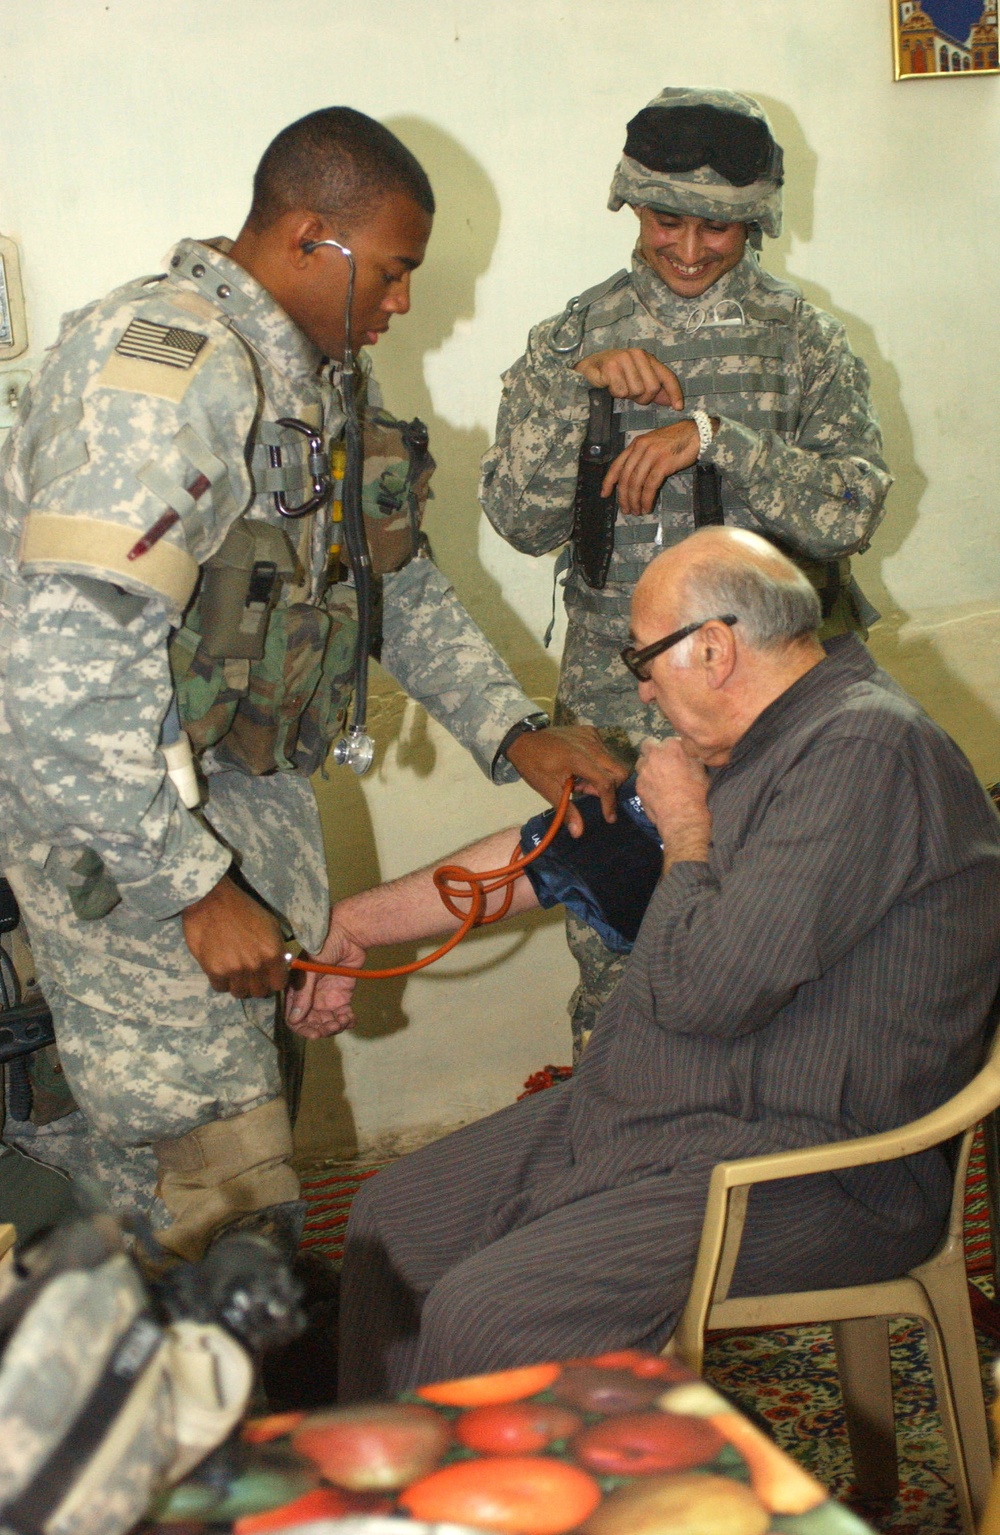 BAGHDAD, IRAQ -- Sgt. Clydell White, of Houston, TX, a medic with the 1-10 Mountain Division's 2nd Battalion, 22nd Infantry Regiment, checks the blood pressure of an elderly Iraqi citizen while an interpreter looks on, during a patrol the battalion condu